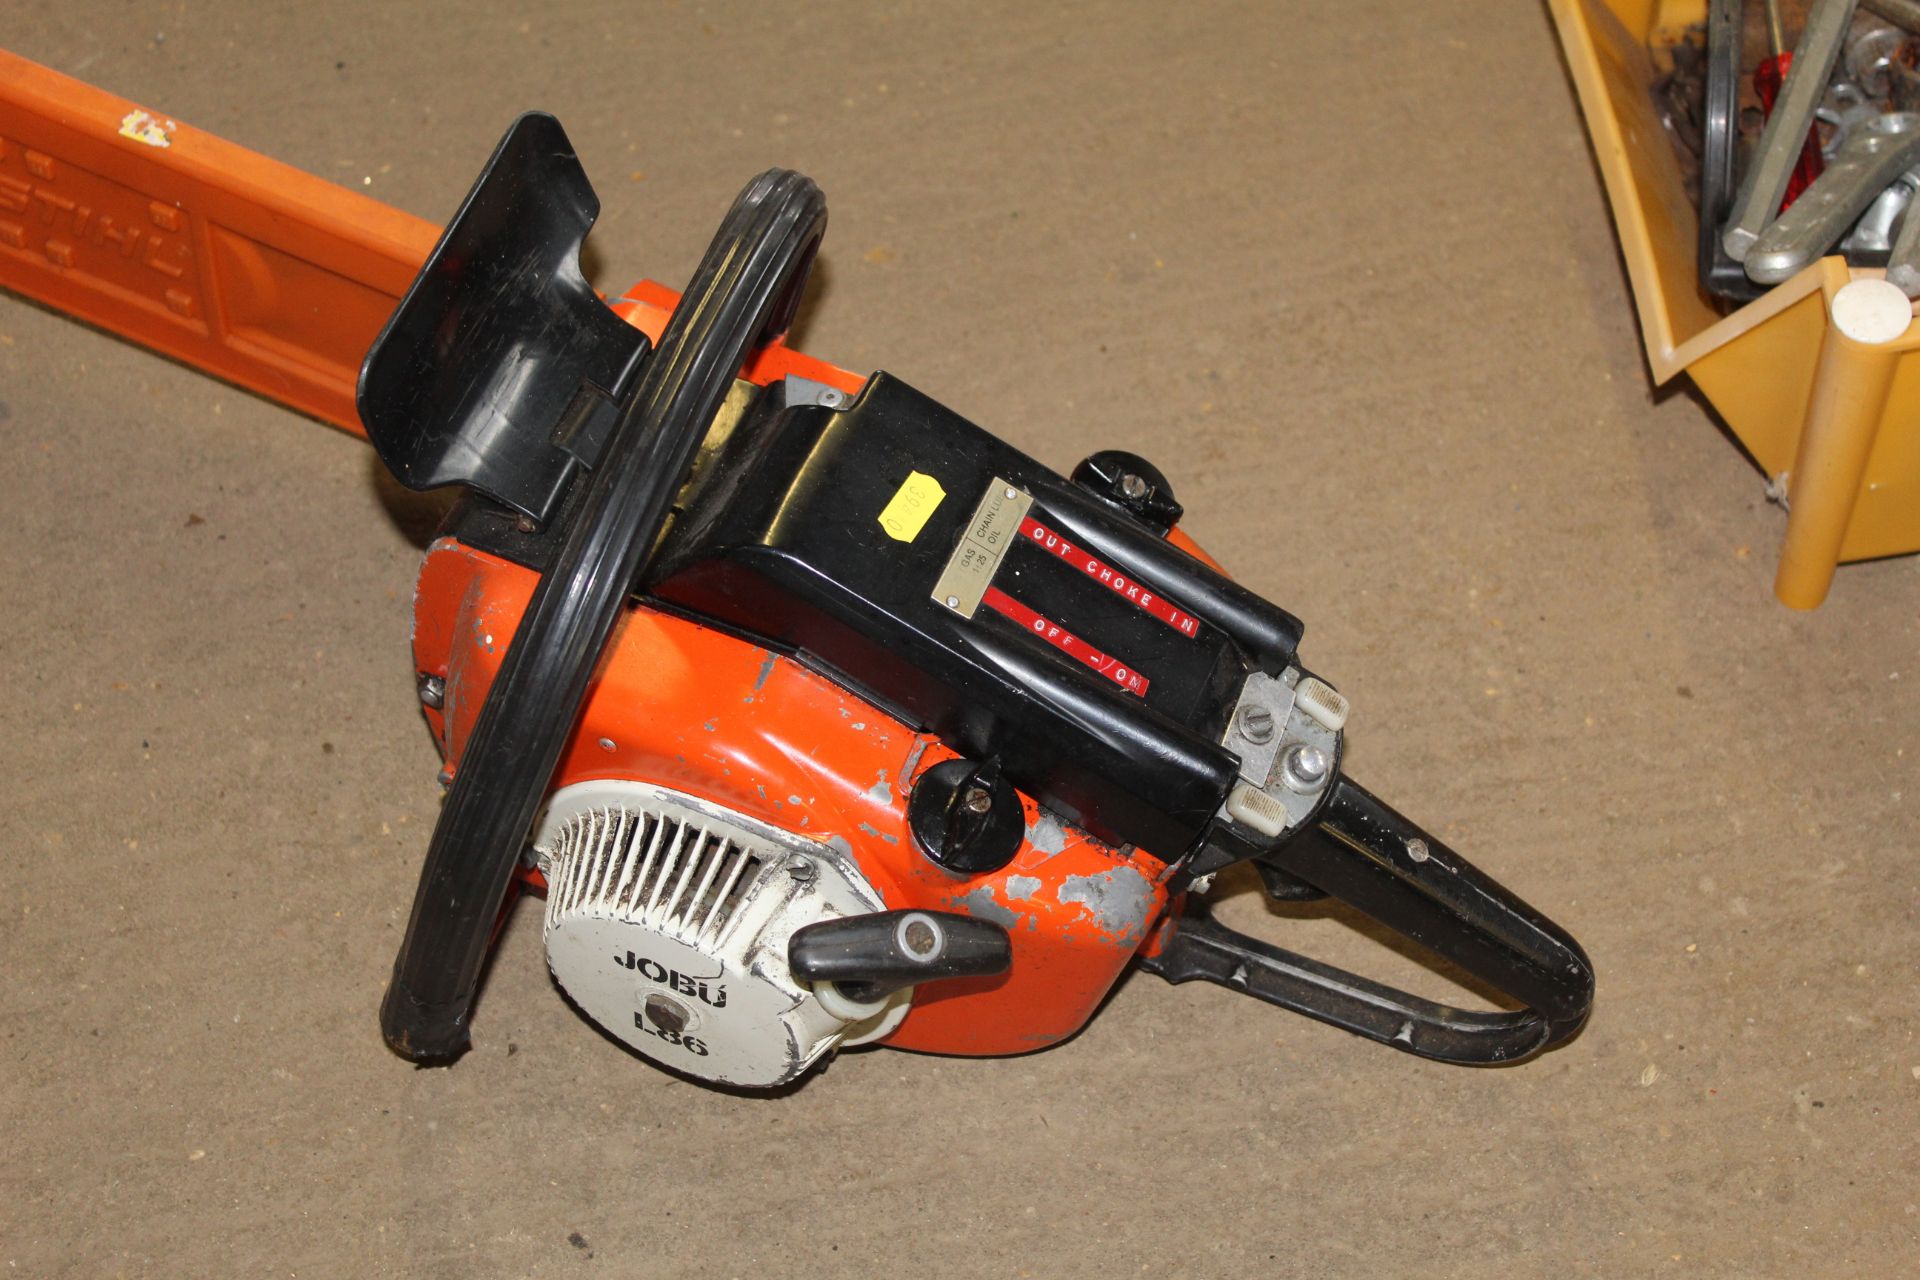 An Oregon petrol chainsaw - Image 2 of 3